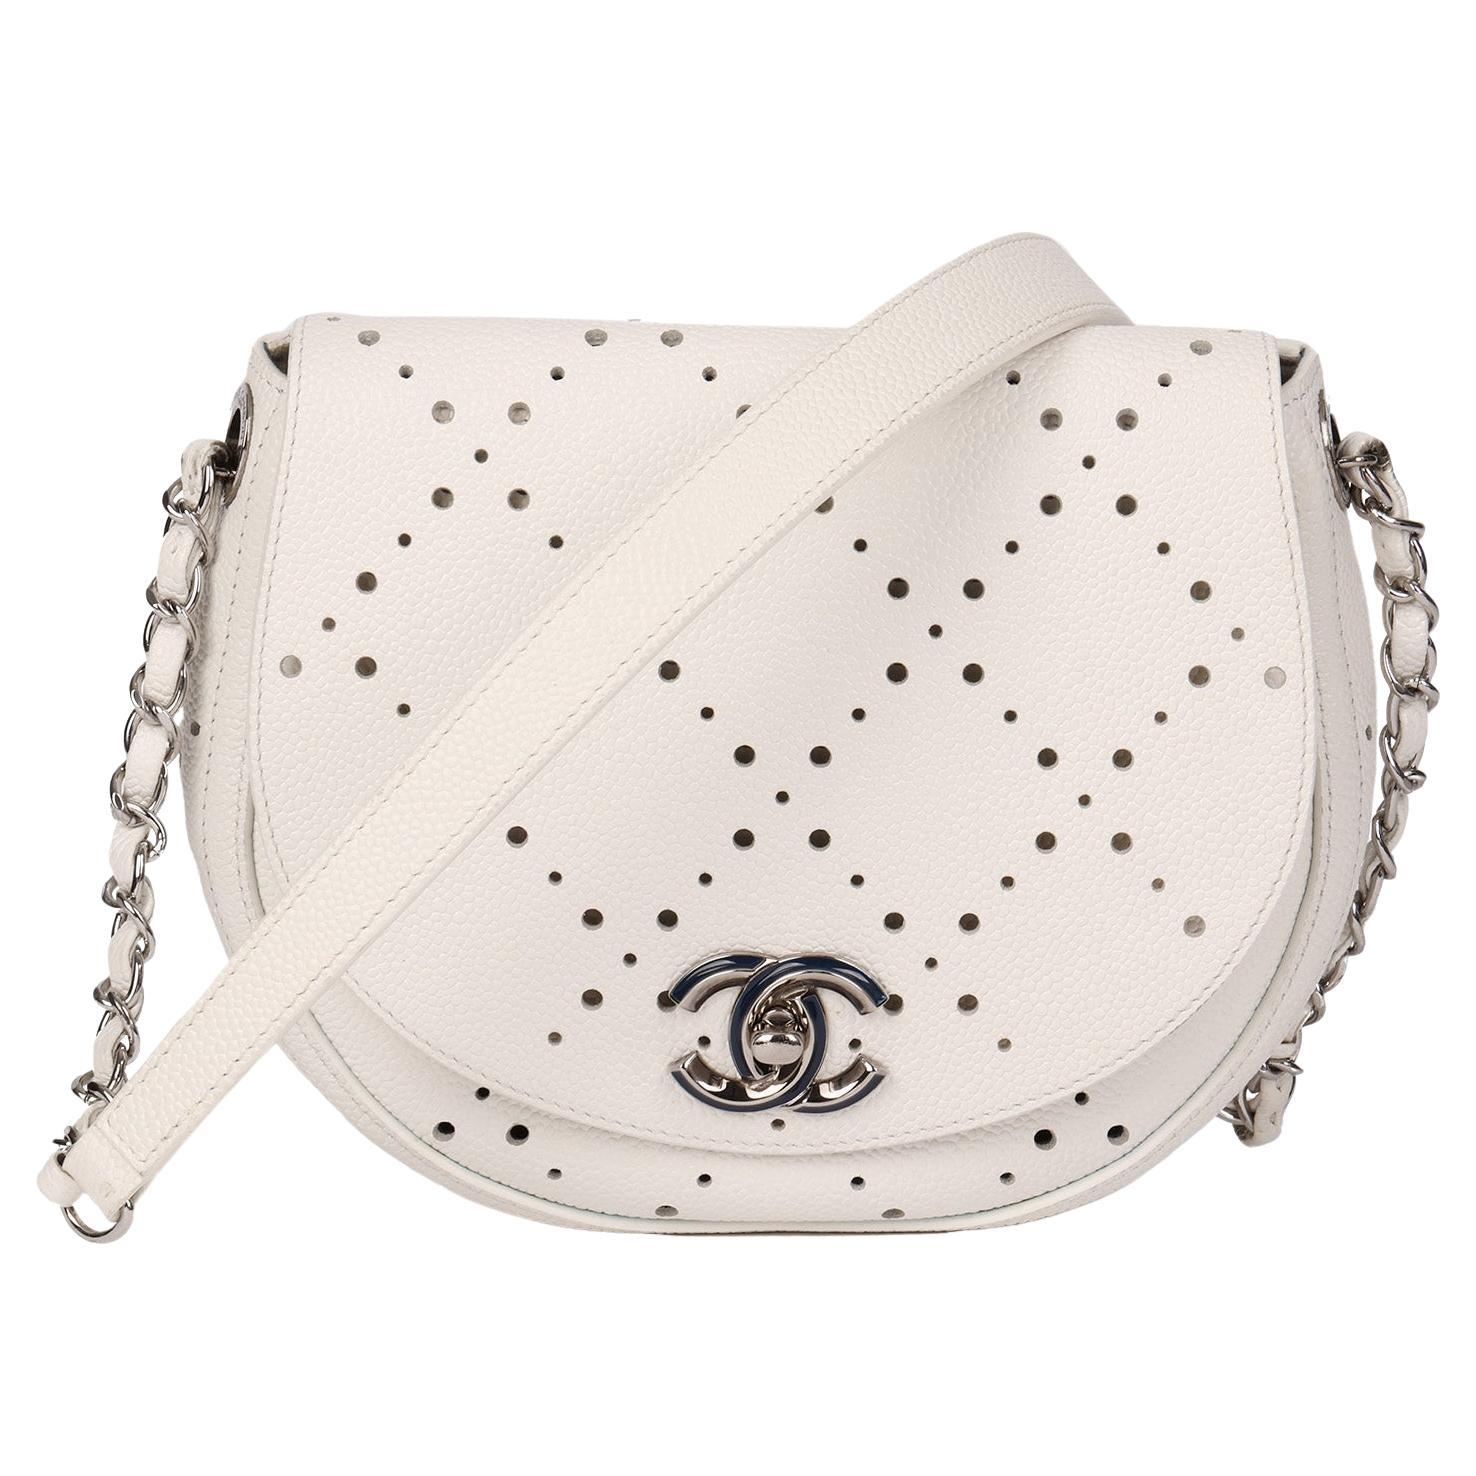 Chanel White Perforated Caviar Leather Cc Perforated Shoulder Bag For Sale  At 1Stdibs | Chanel White Bag, Left Egg 1626, Caviar Leather Meaning